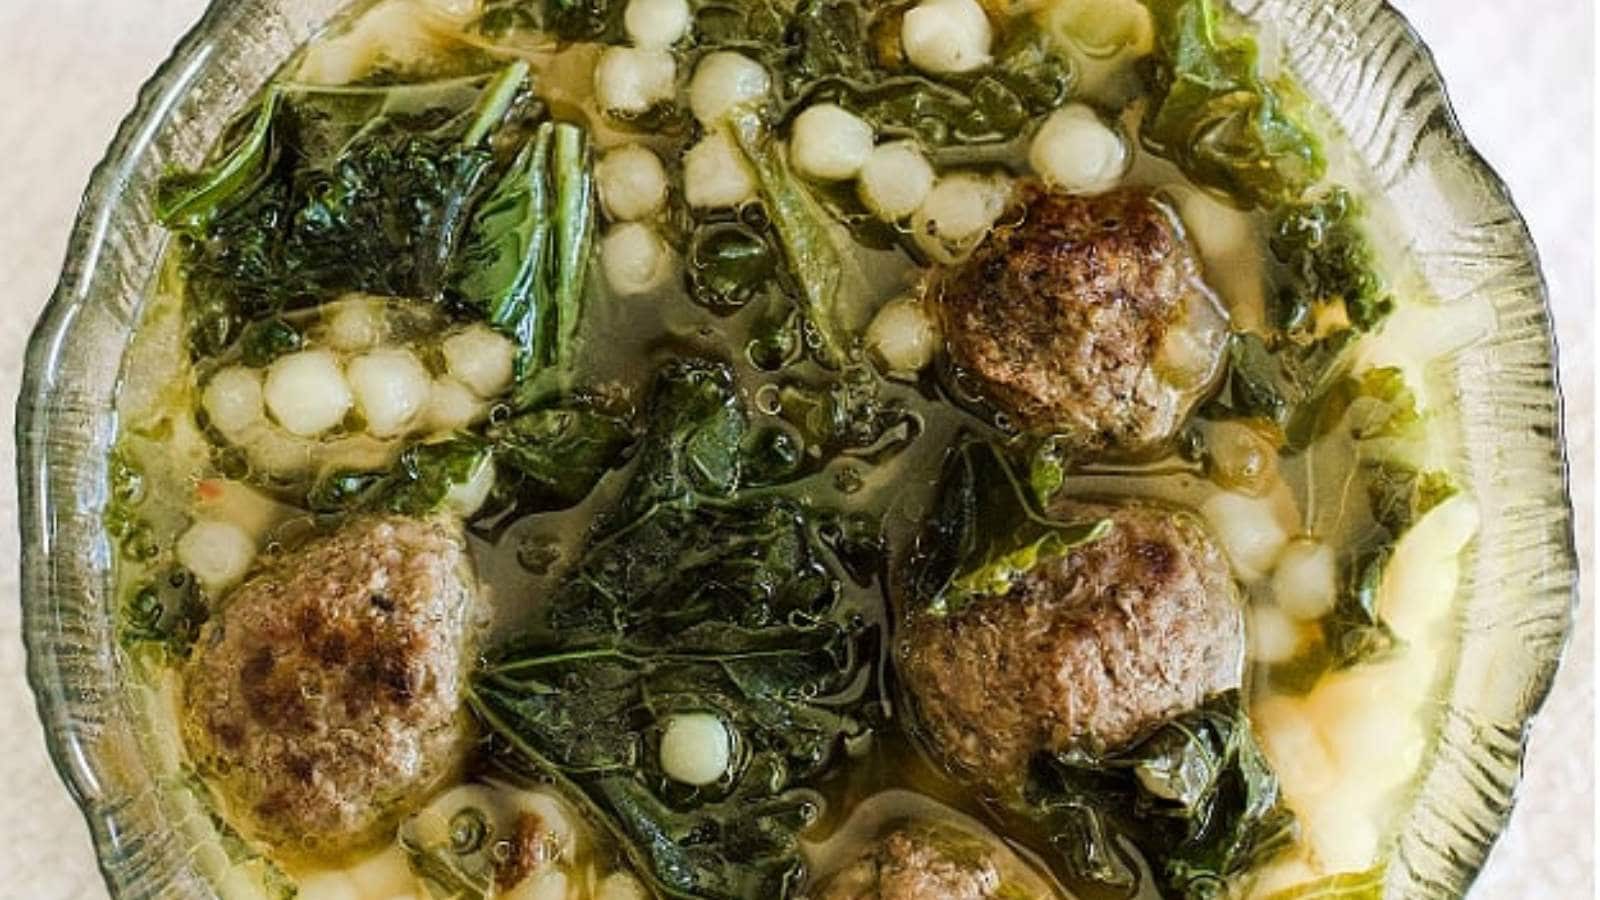 Meatball Kale Soup With Couscous recipe by Dancing Through The Rain.